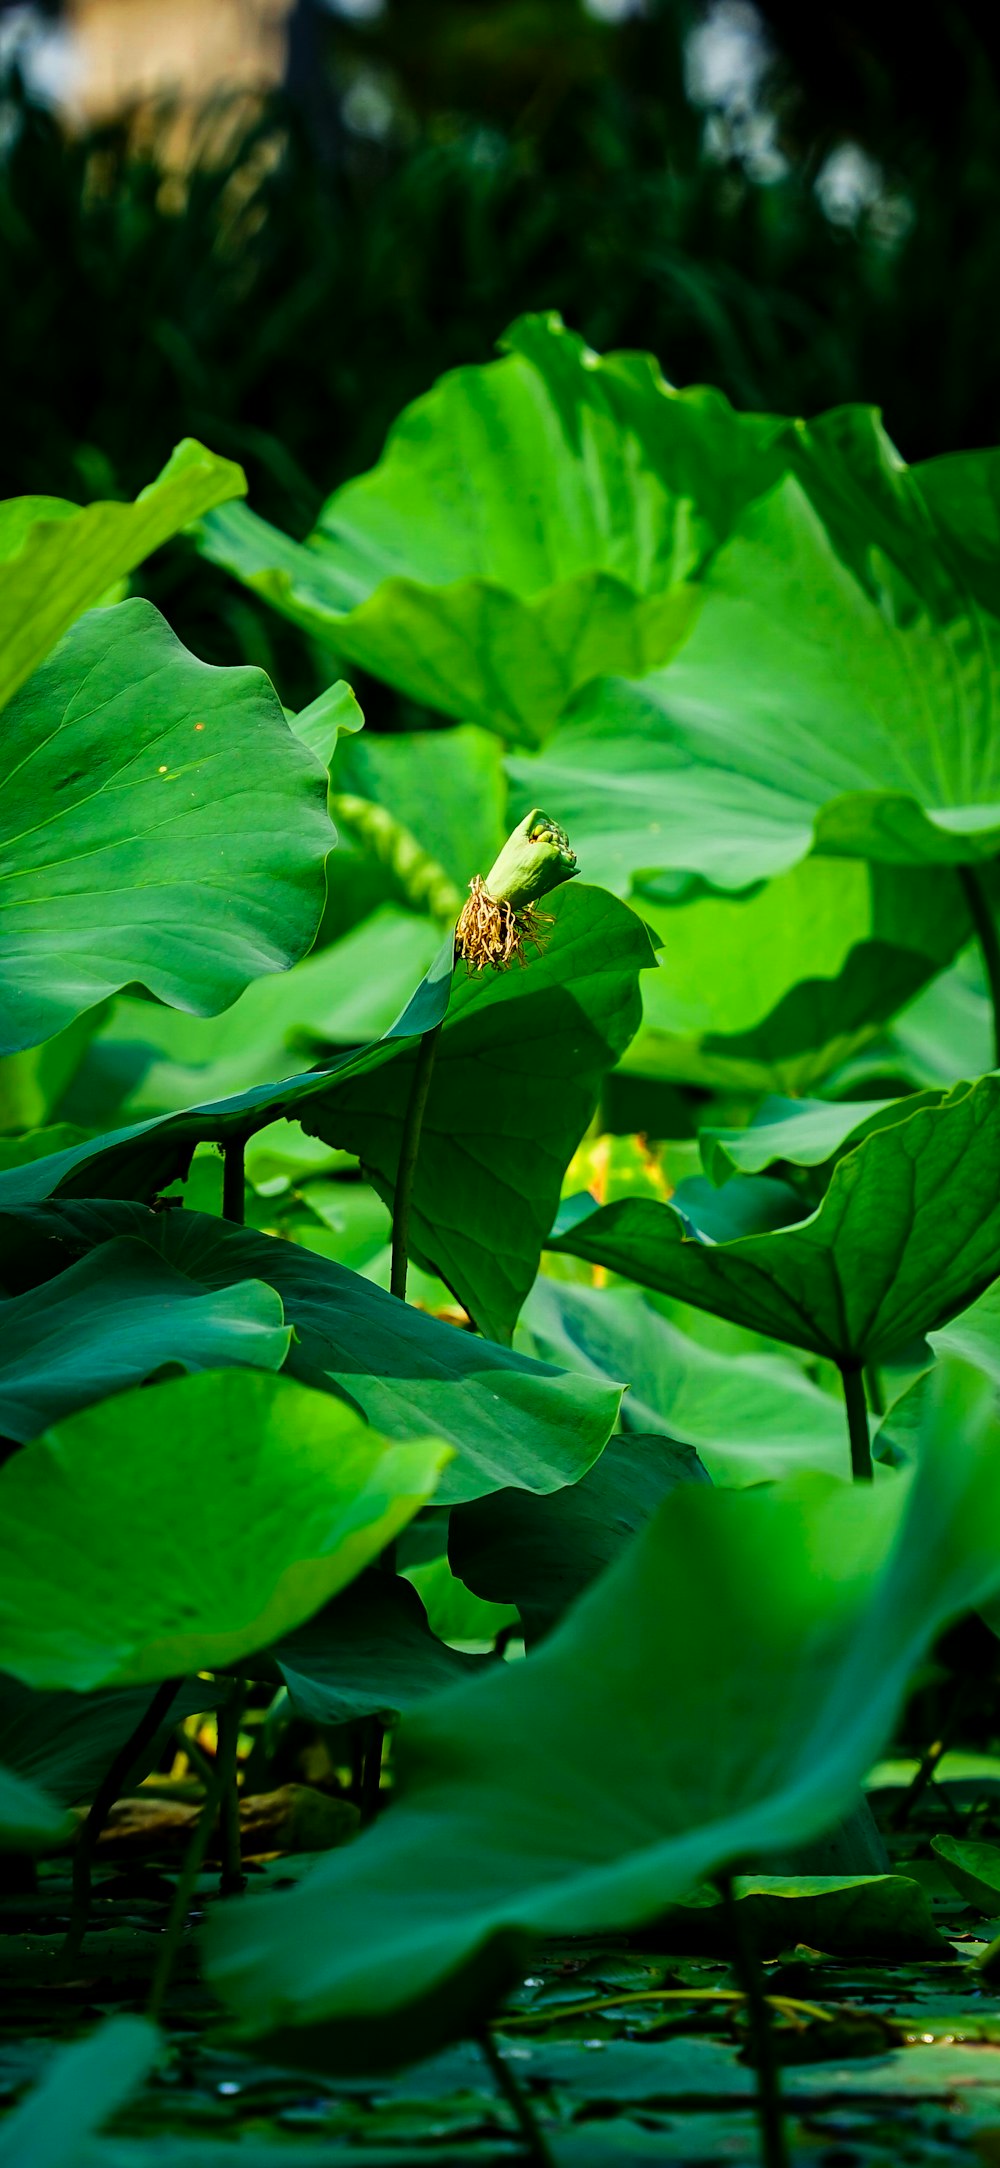 a large green leafy plant in the middle of a pond